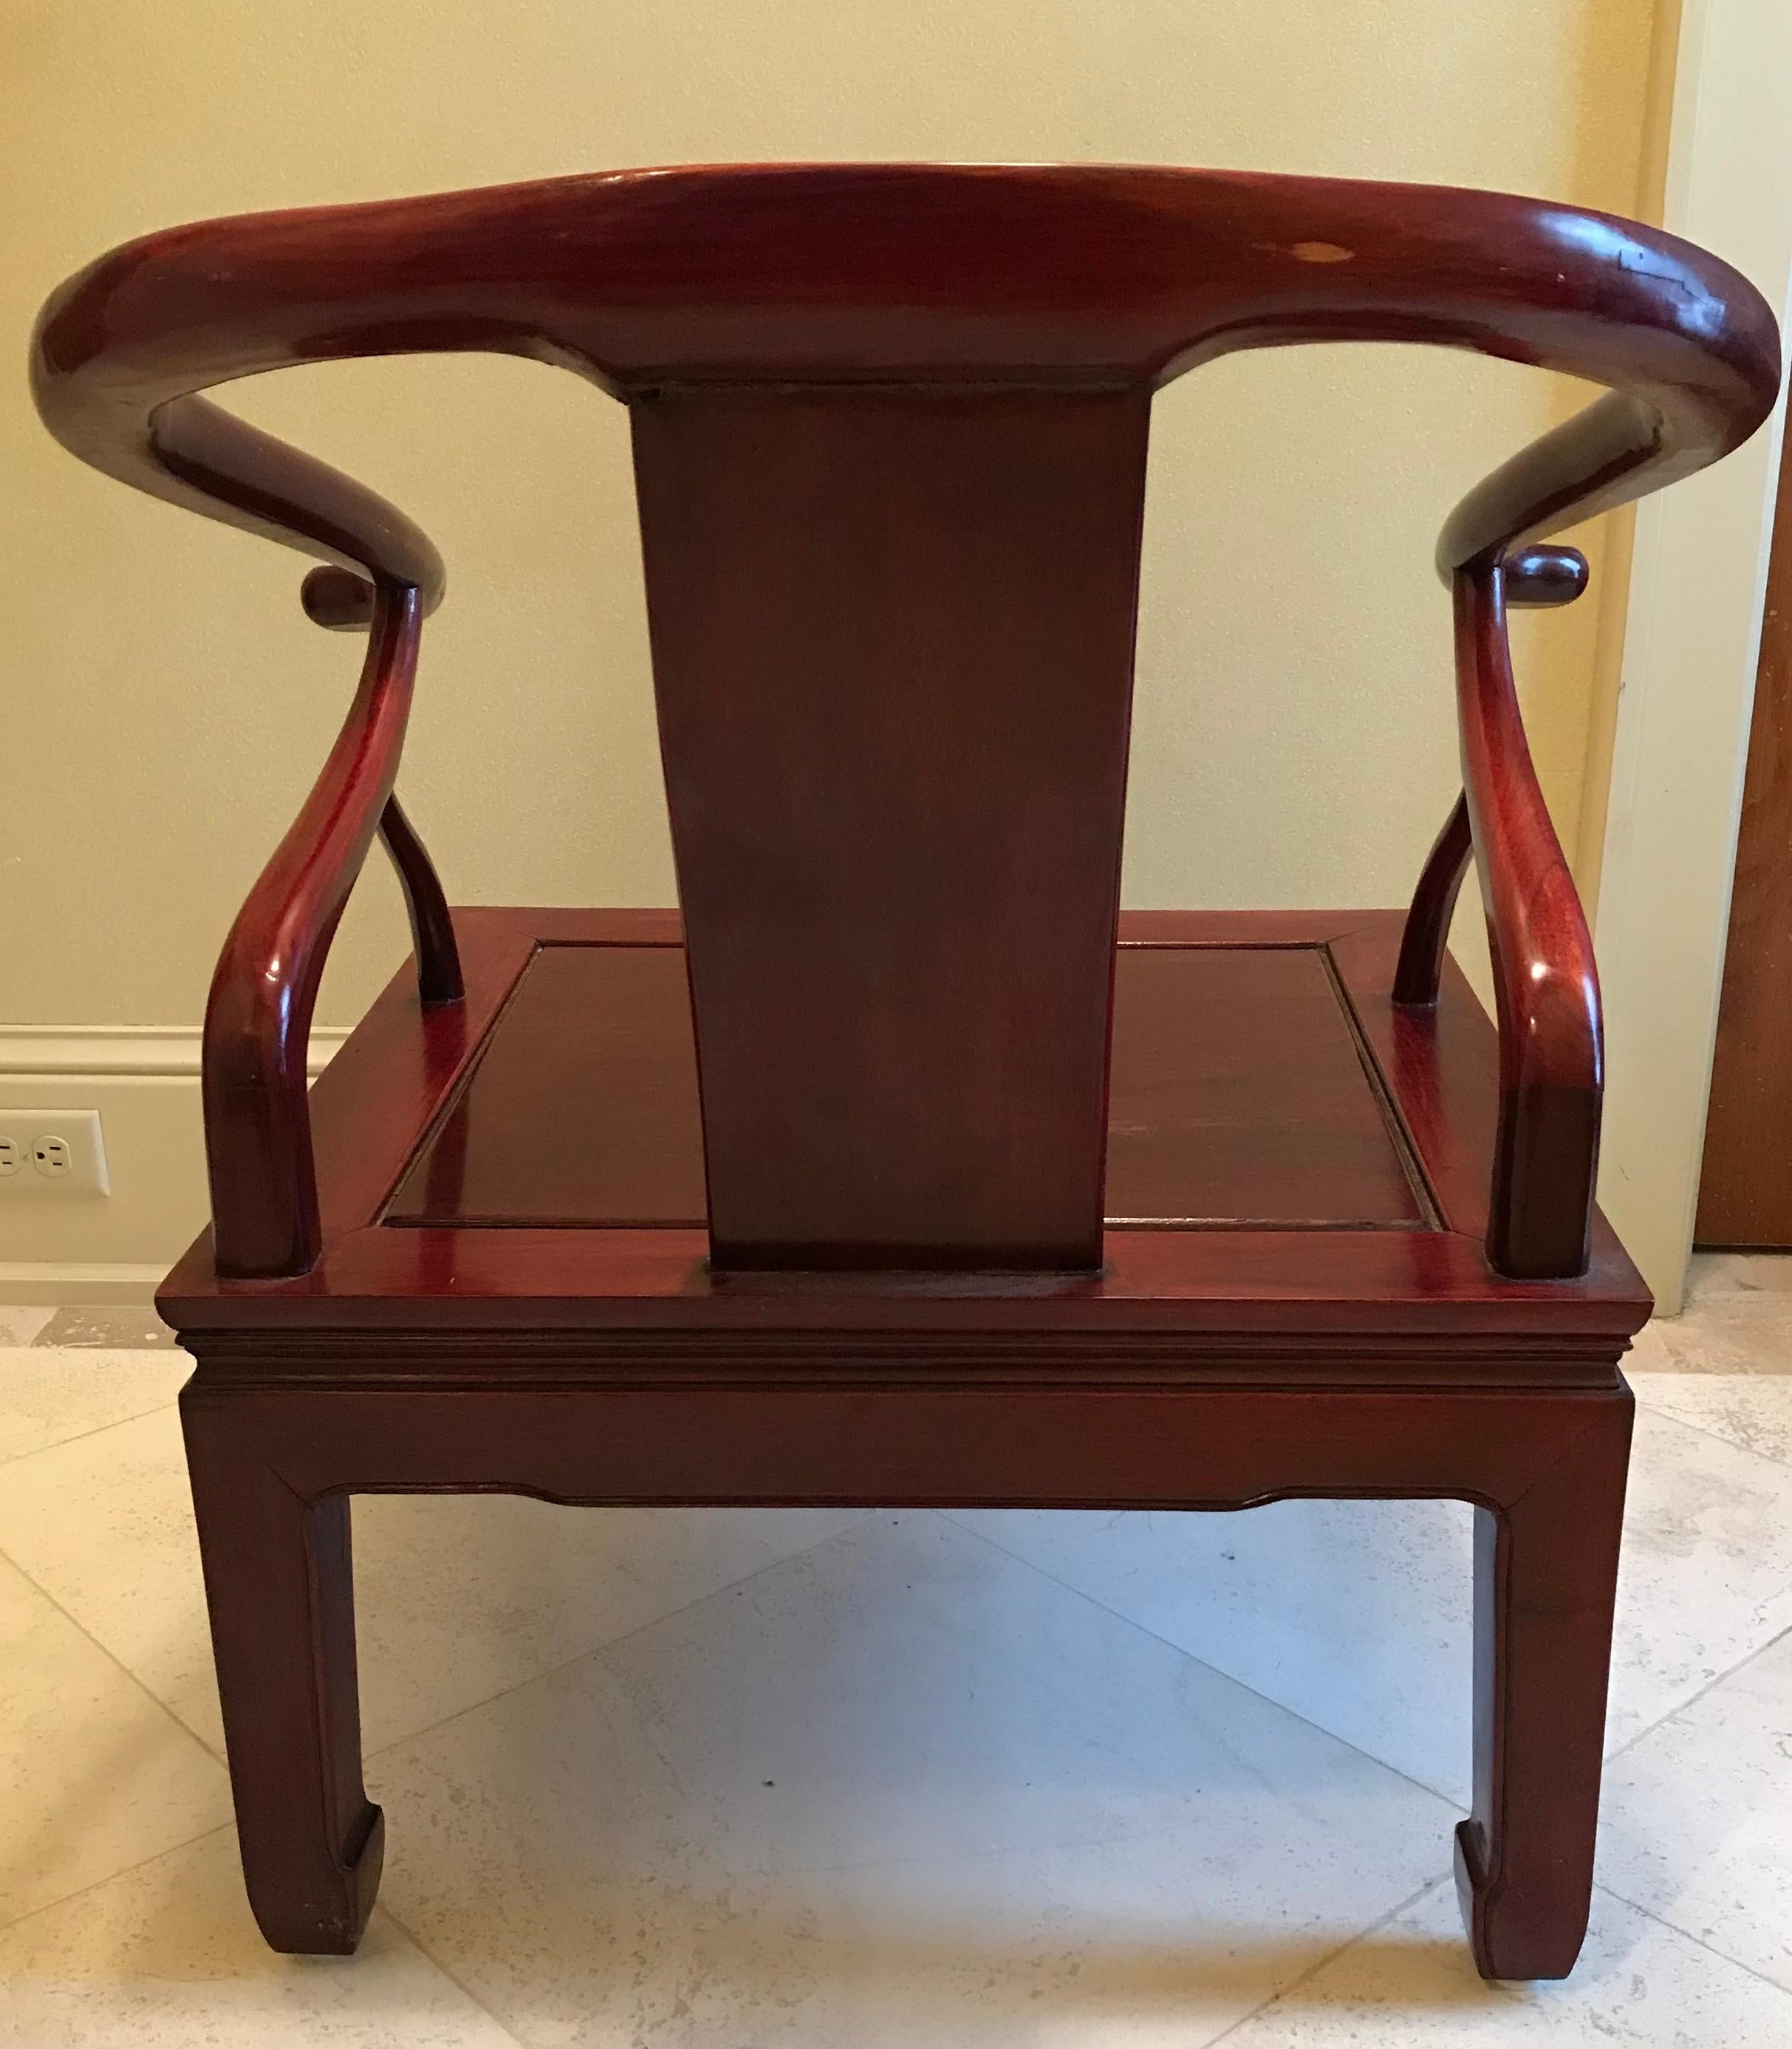 These Classic red lacquer bent elm Chinese chairs are simple yet powerful. With curved arms and detailed square legs, they epitomize the most refined of this genre. The back has a simple Shou longevity symbol carved in the center and a circle within